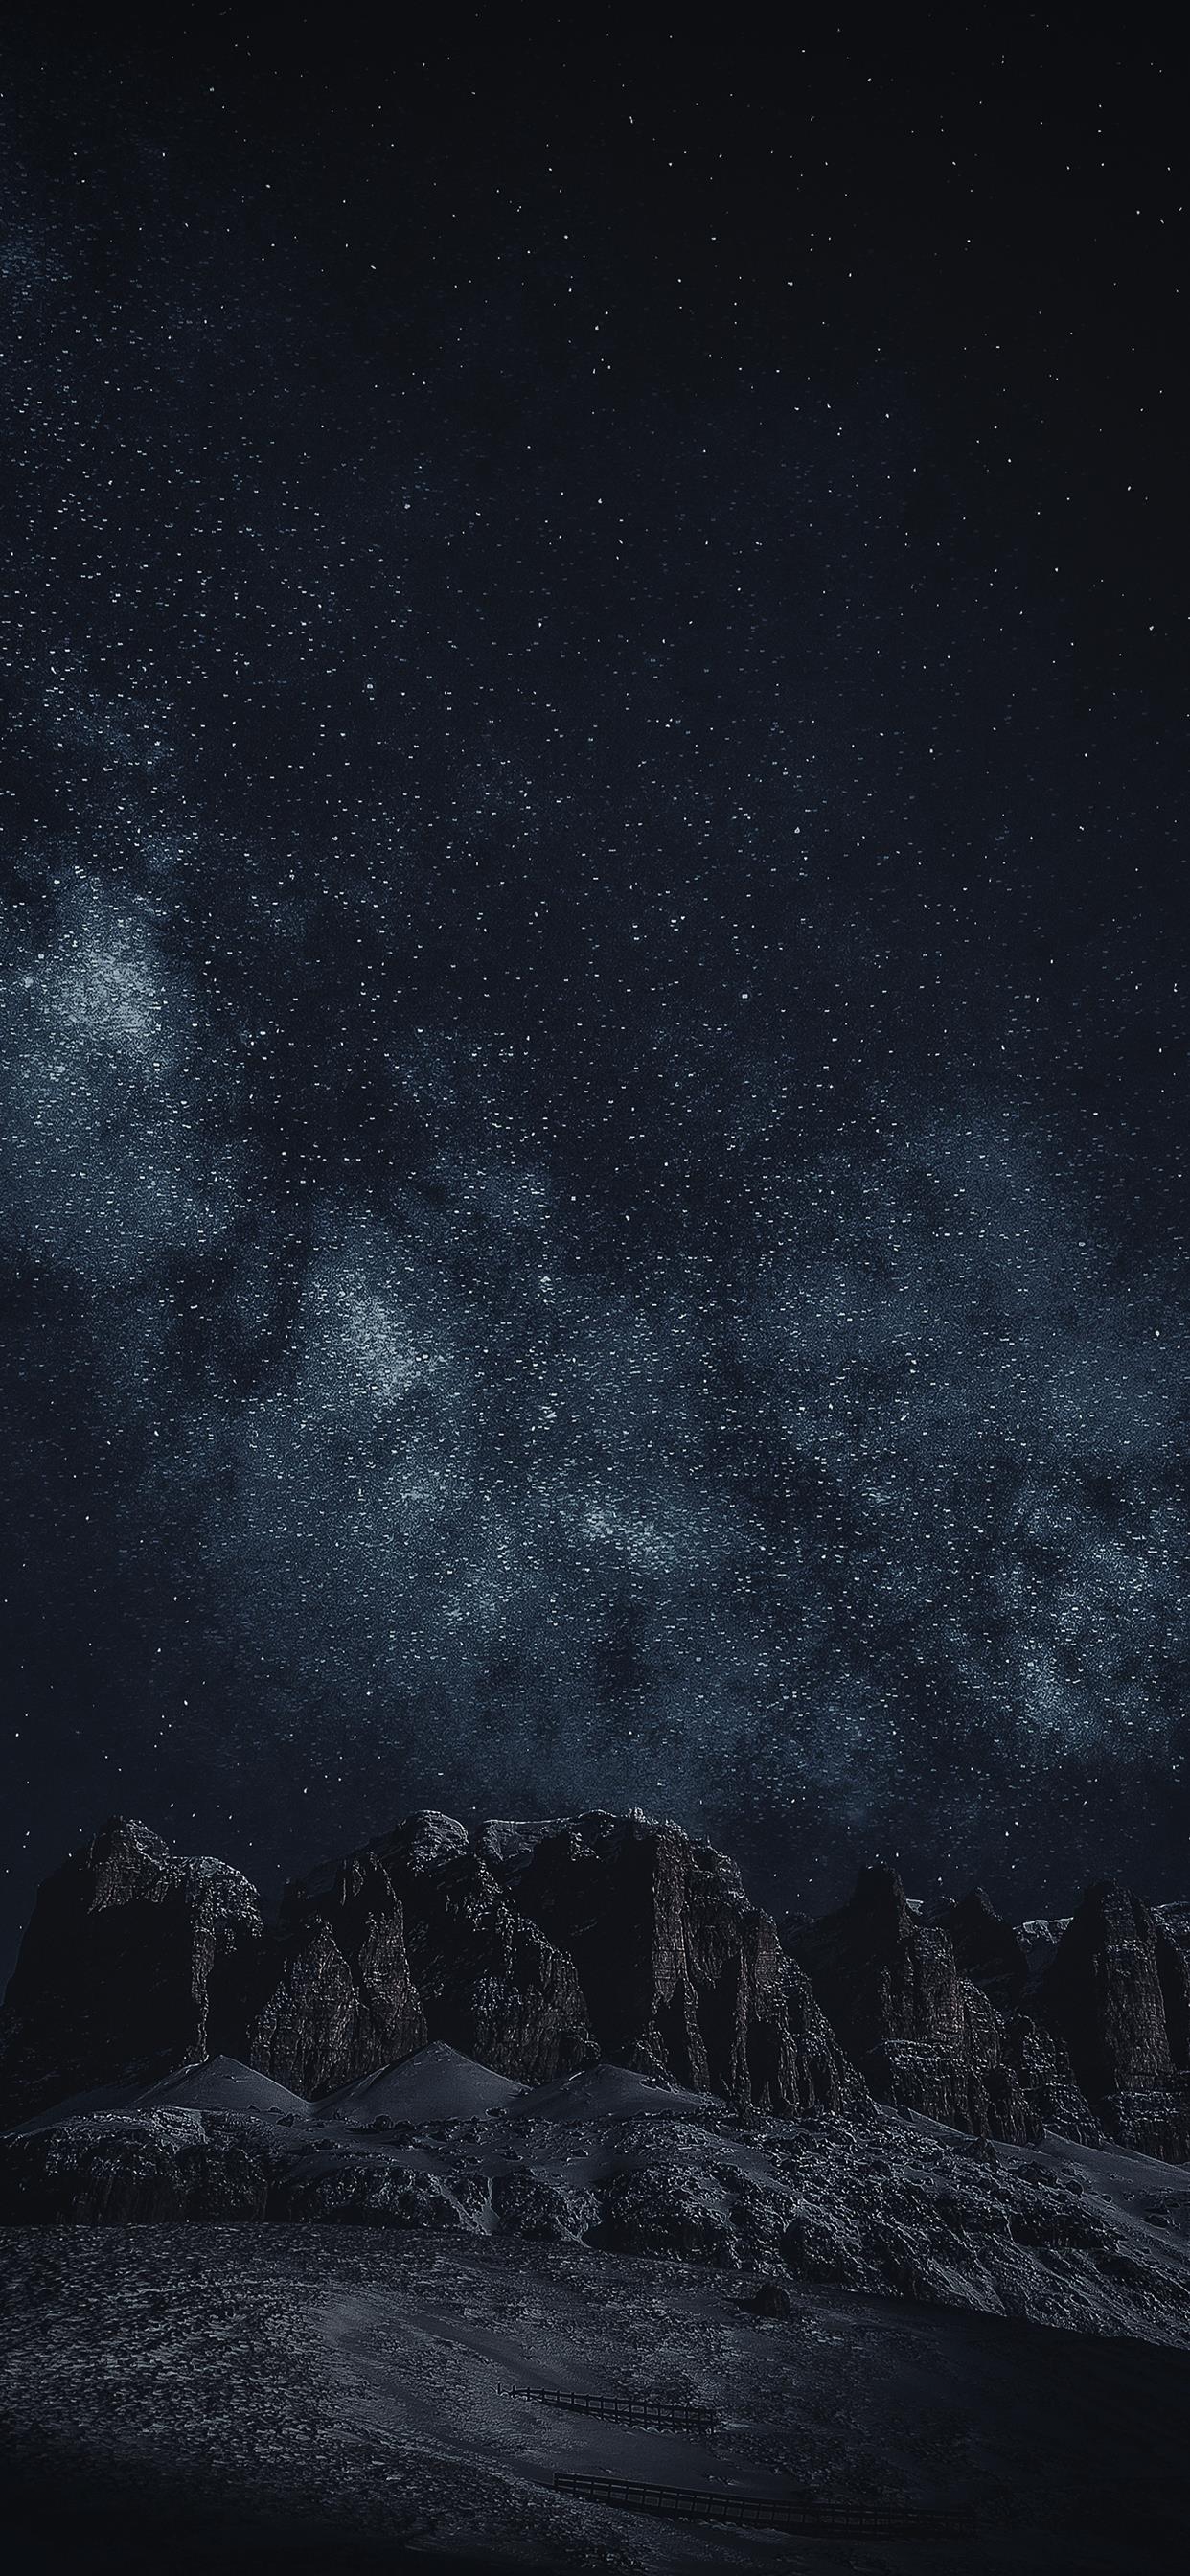 Black Rock Formation During Night Time iPhone X Wallpaper